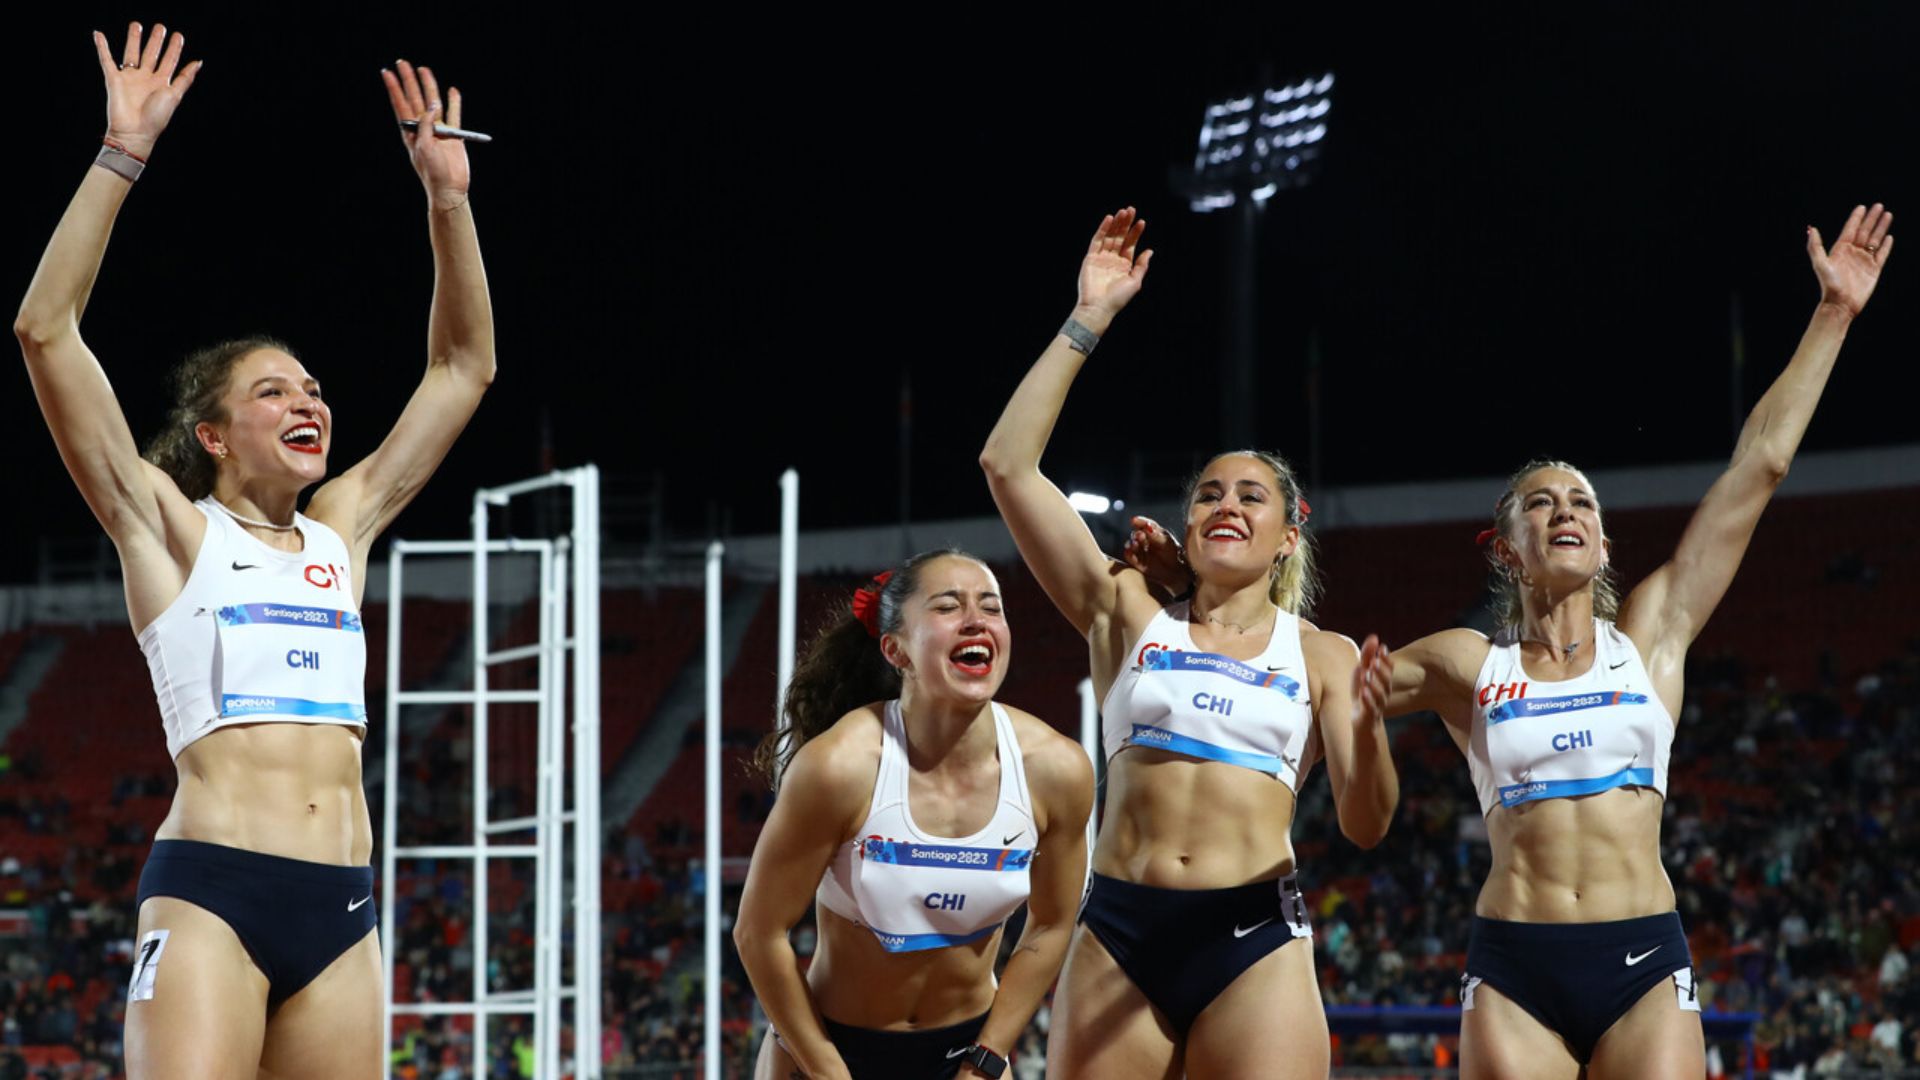 Chileans up to date: female's 4x100 Relay Team Wins Pan American Silver